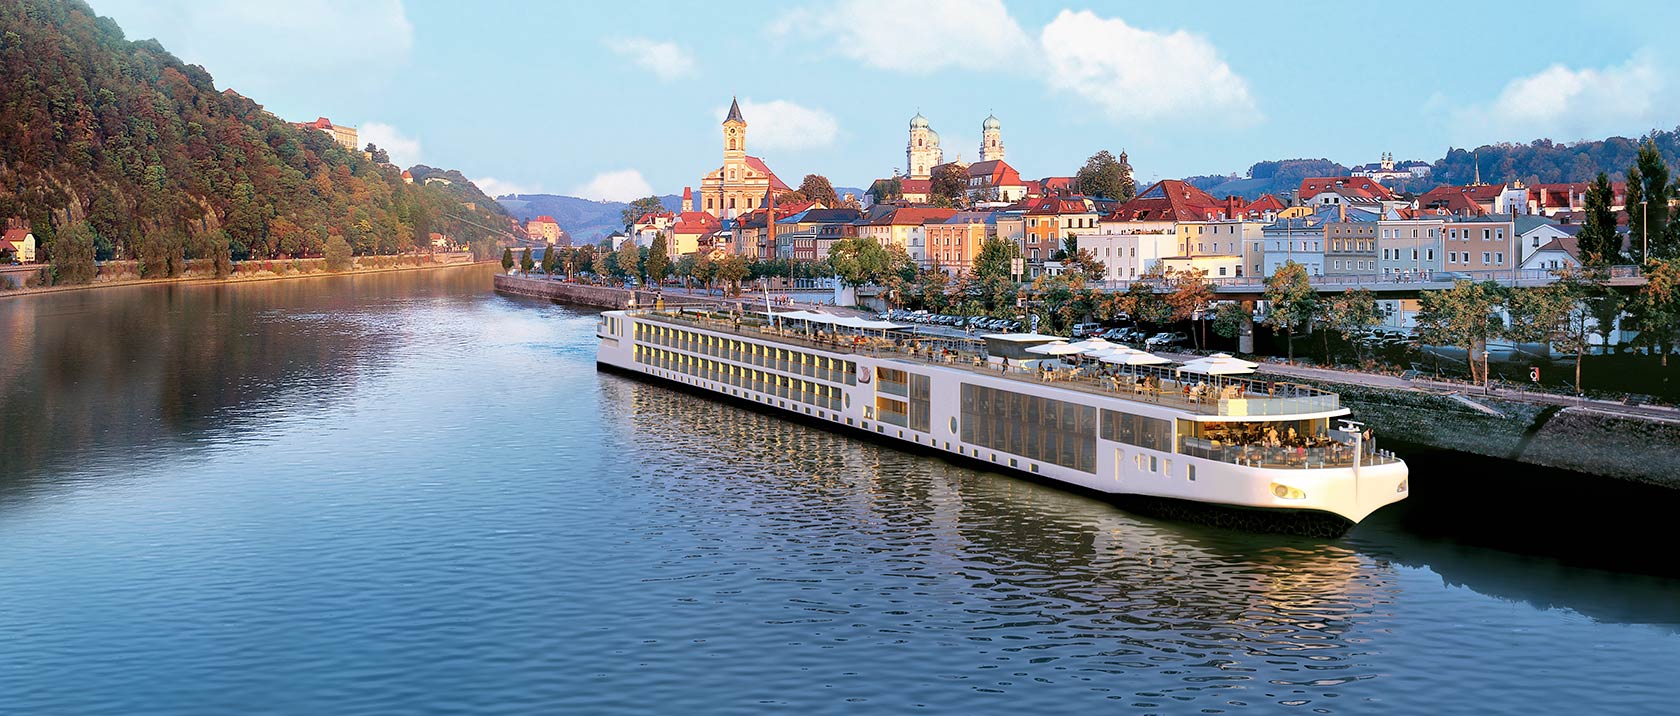 Severe Droughts In Europe Are Disrupting River Cruising